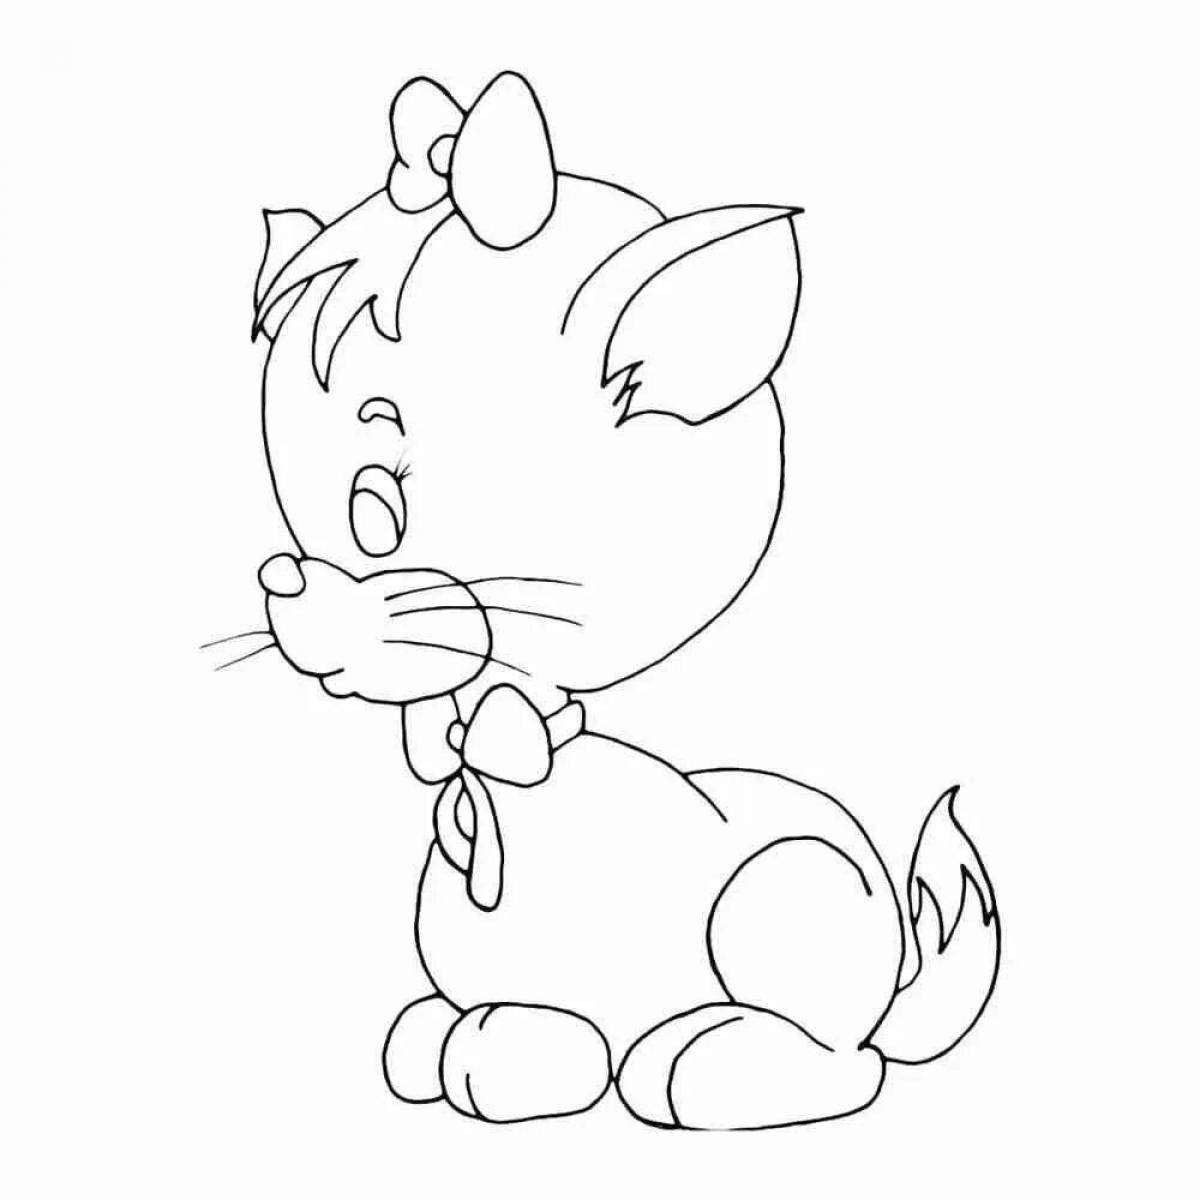 Coloring kitty for kids